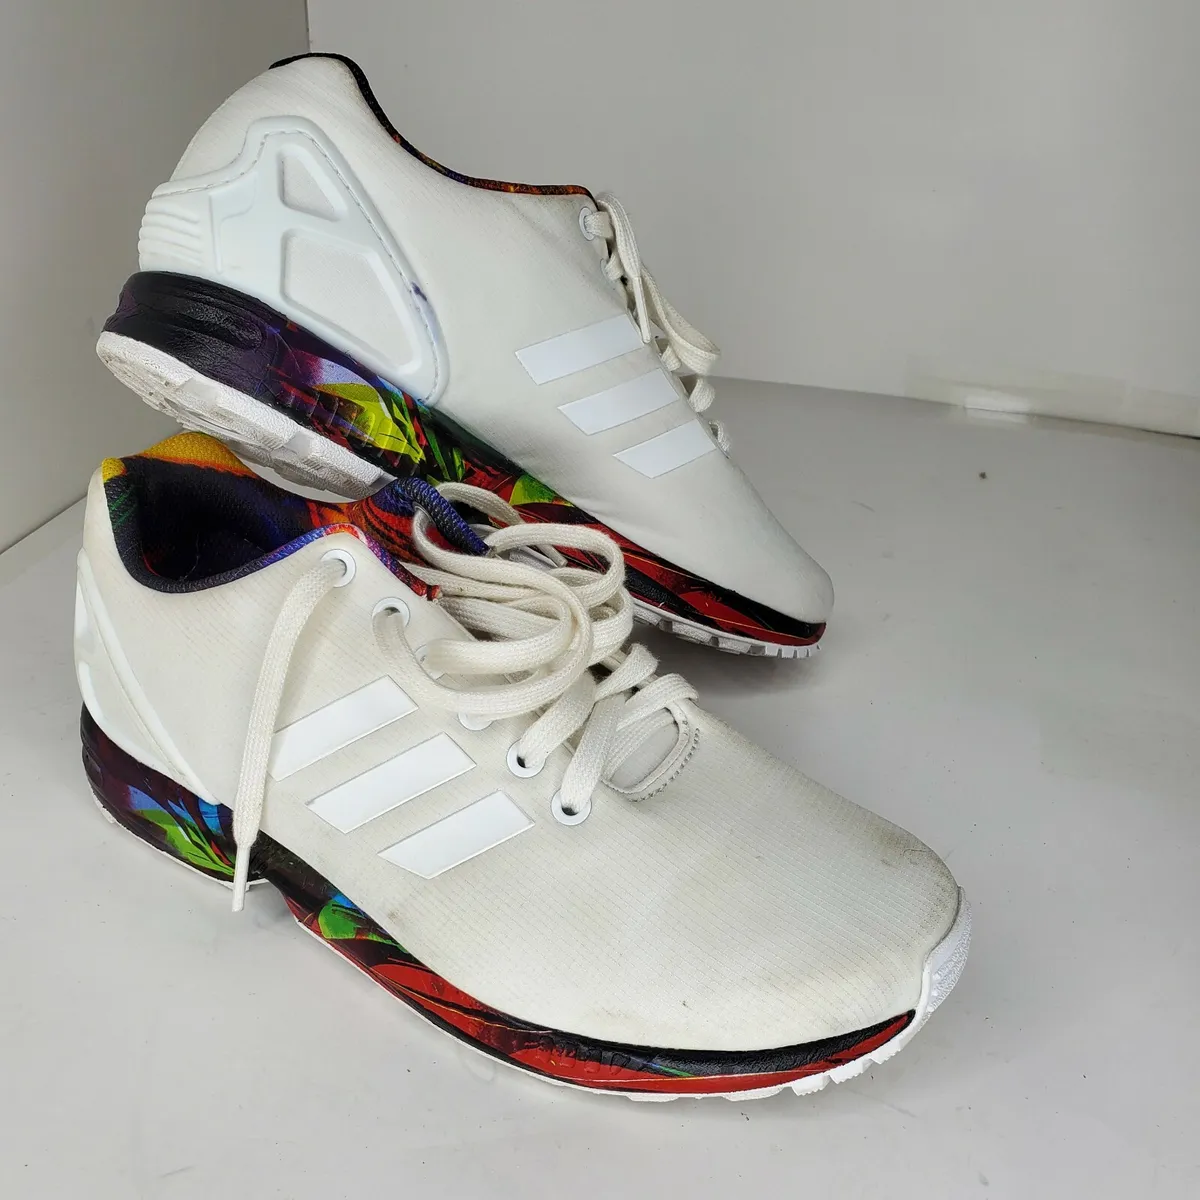 Adidas ZX Flux Floral Multi-Color Sole White Sneakers Shoes Size 7 eBay